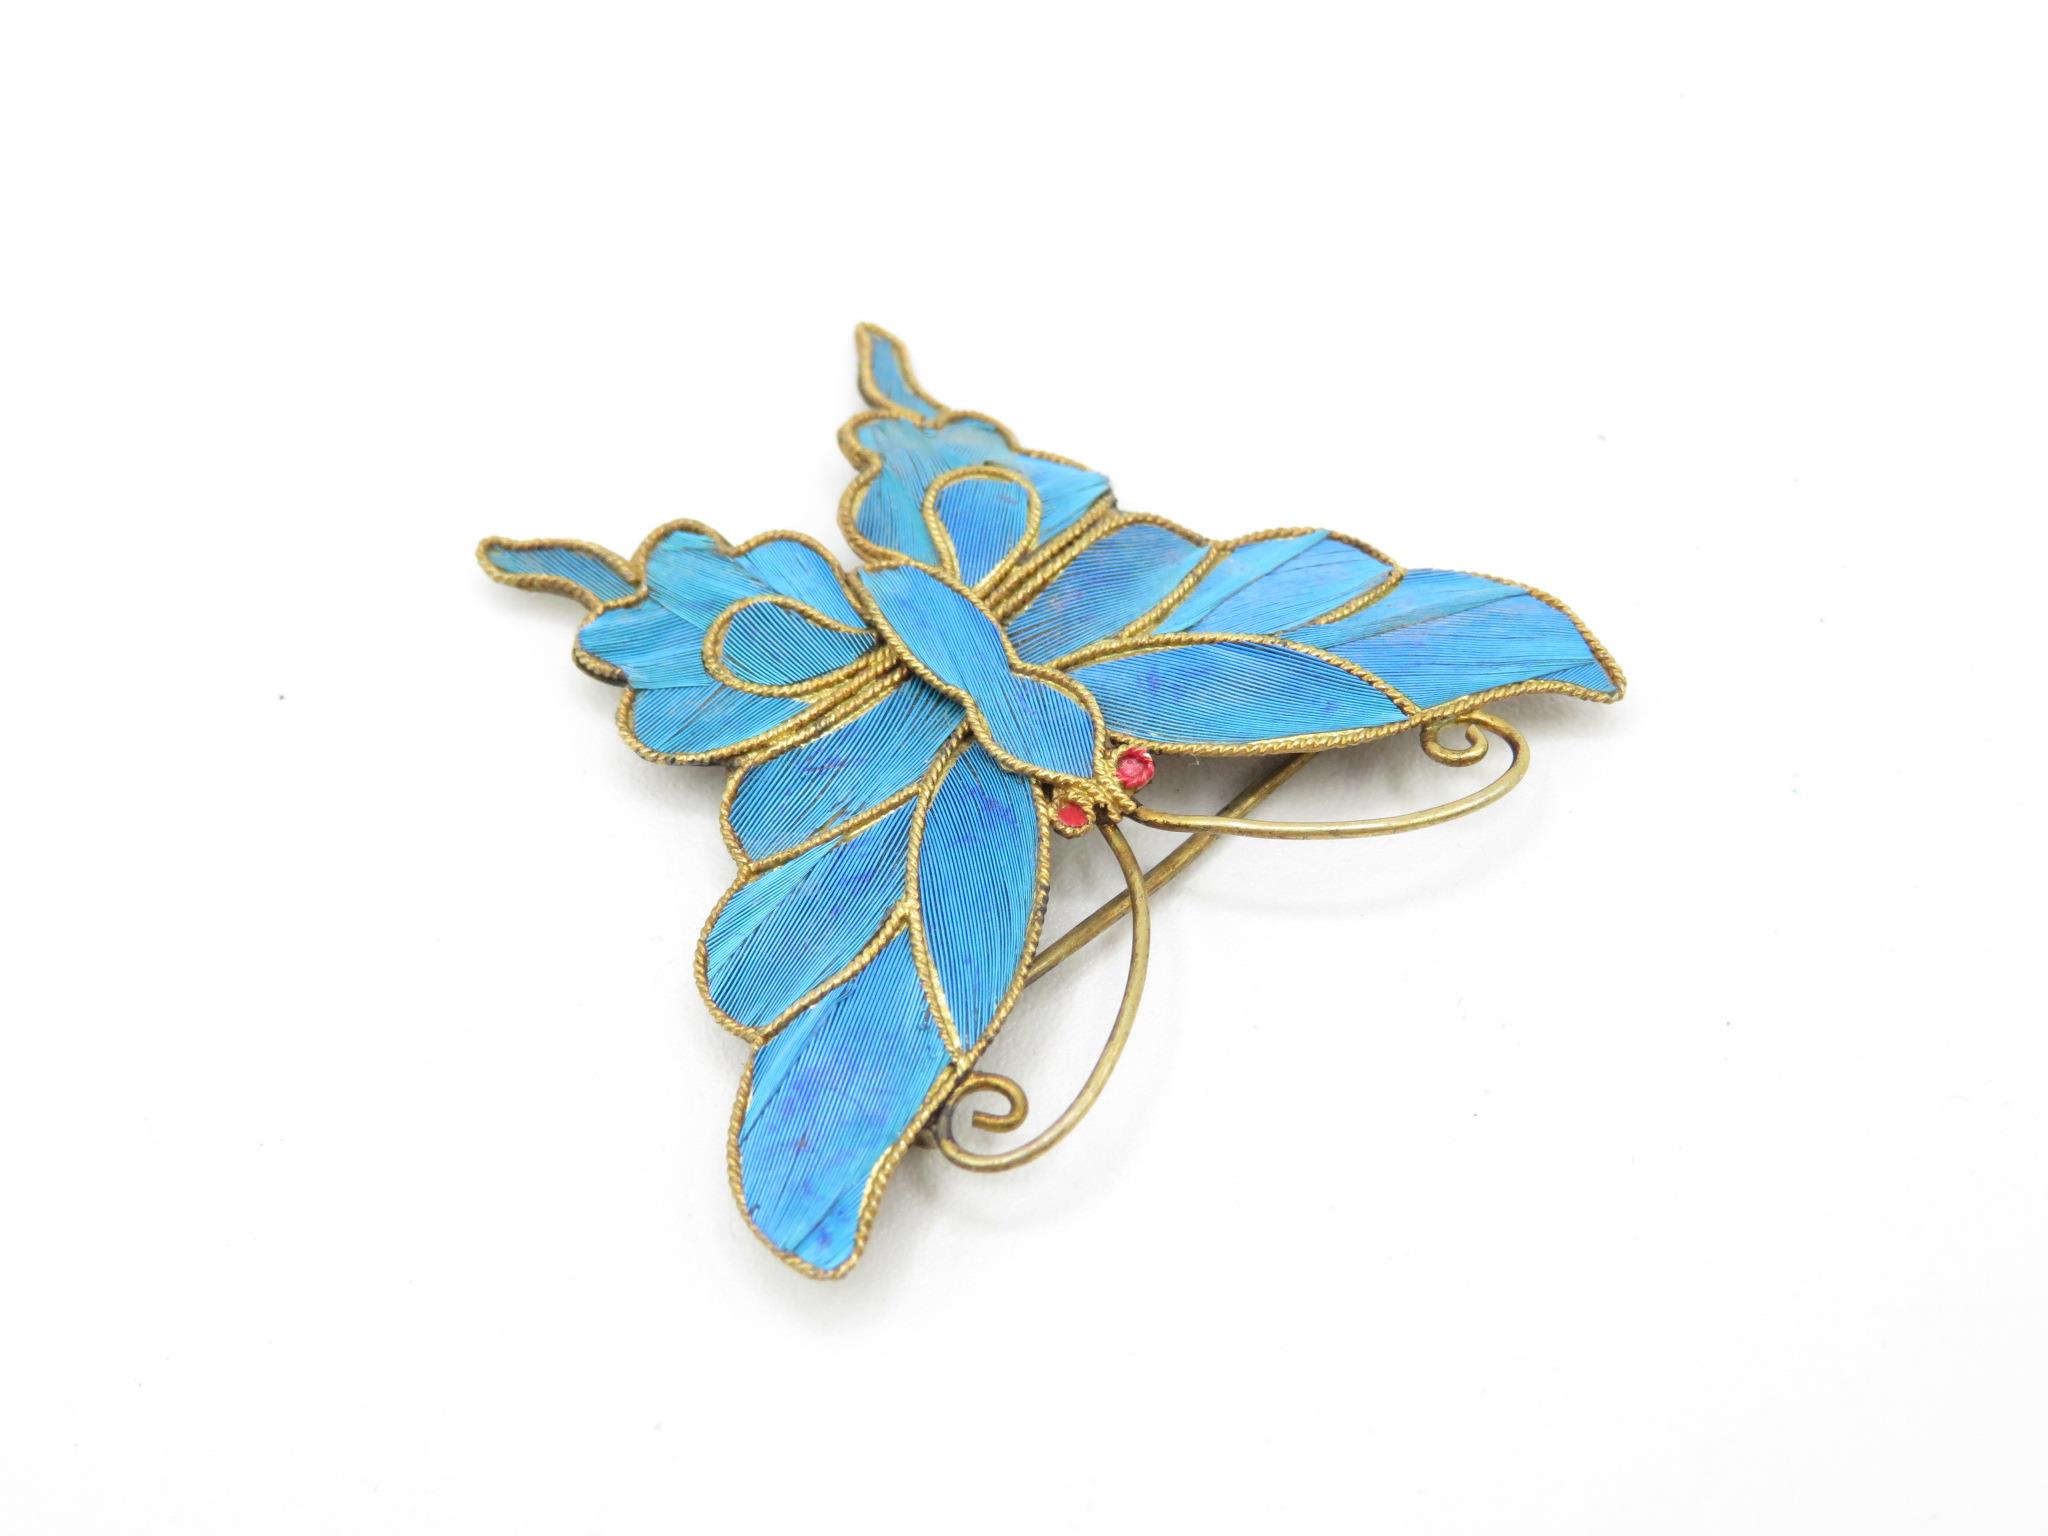 A Tian-Tsui Kingfisher Feather Butterfly Brooch - Image 3 of 4